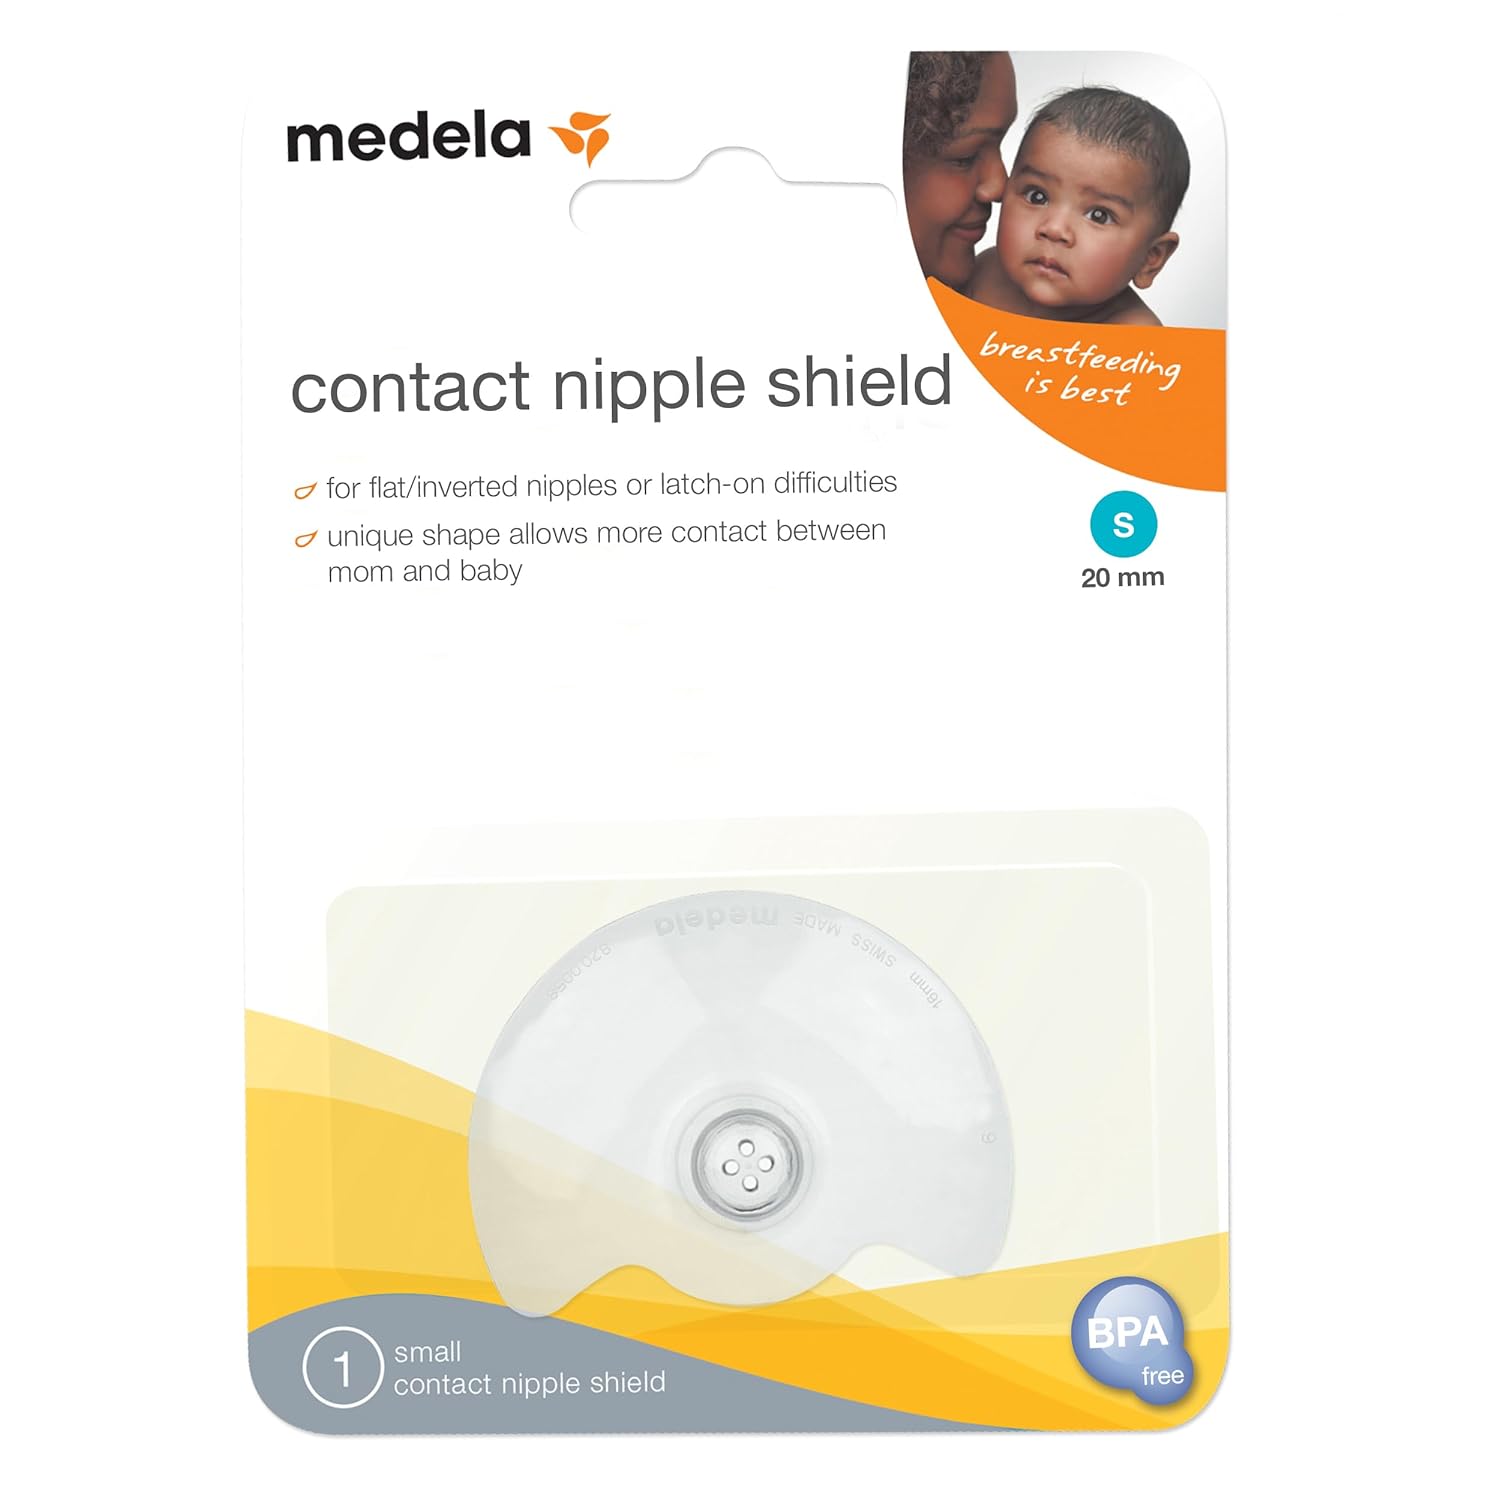 Nipple Shields for Breastfeeding: Benefits, Sizing, and More